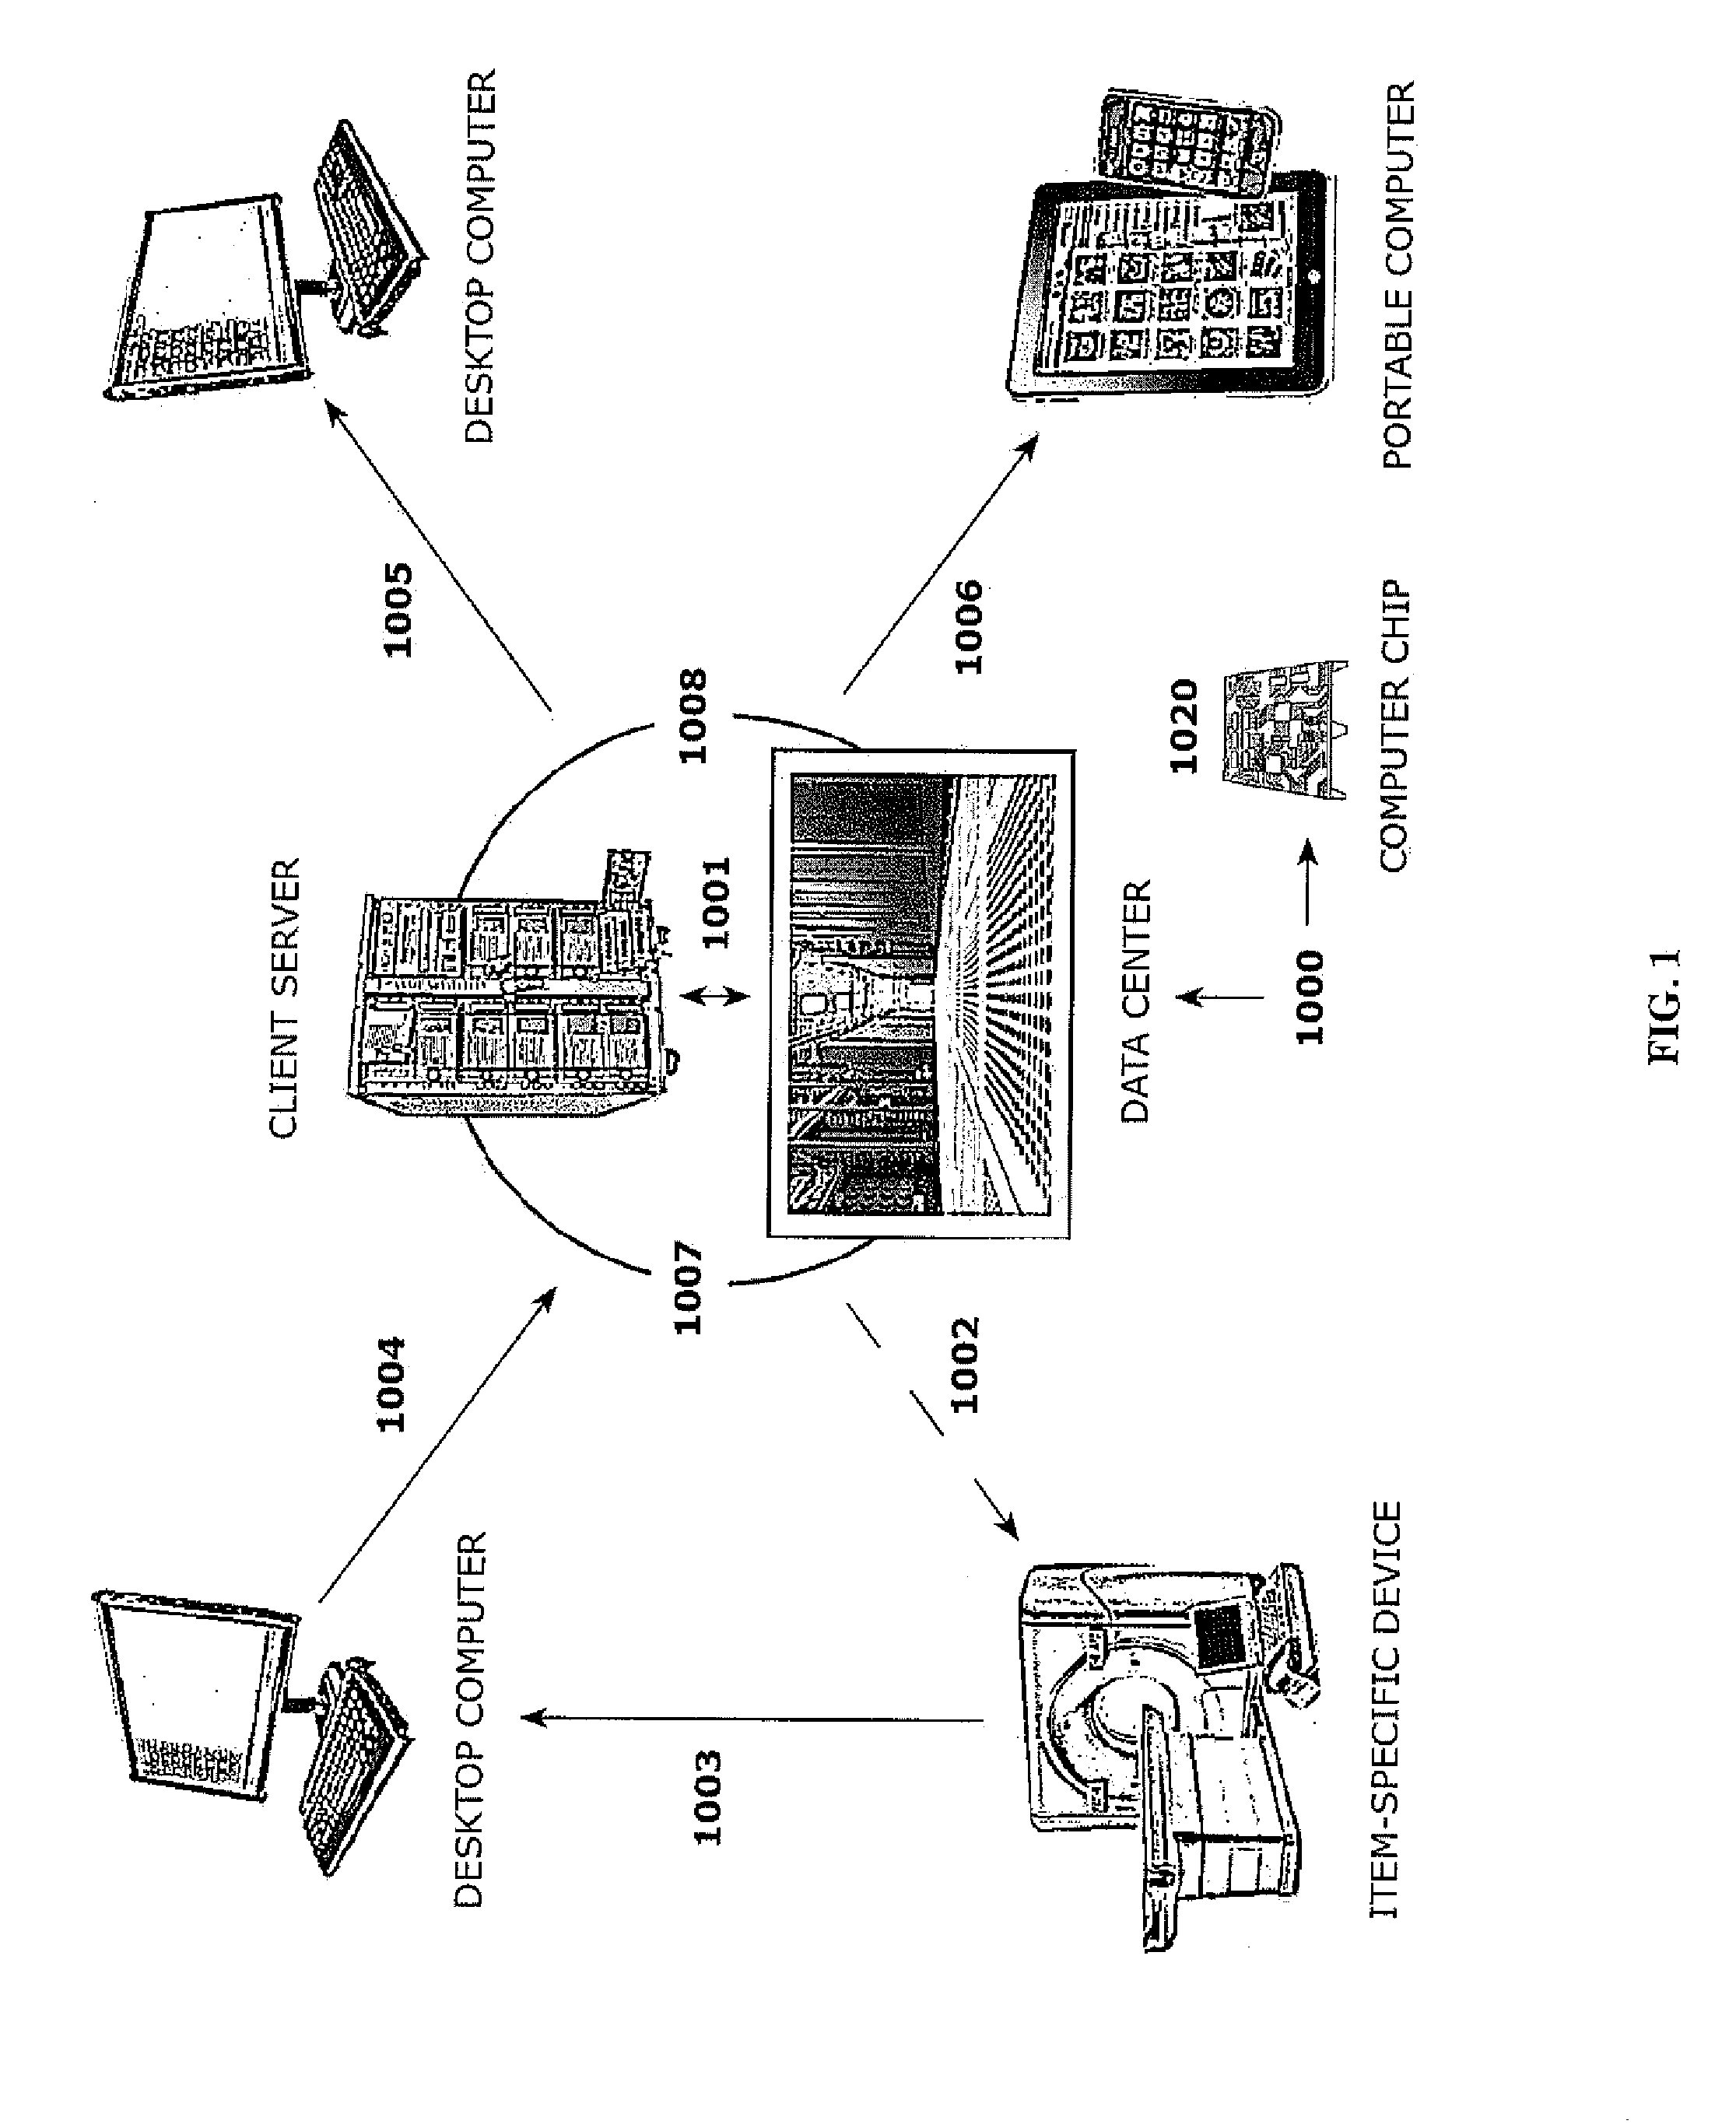 Method and System for Creating and Utilizing a Metadata Apparatus for Management Applications